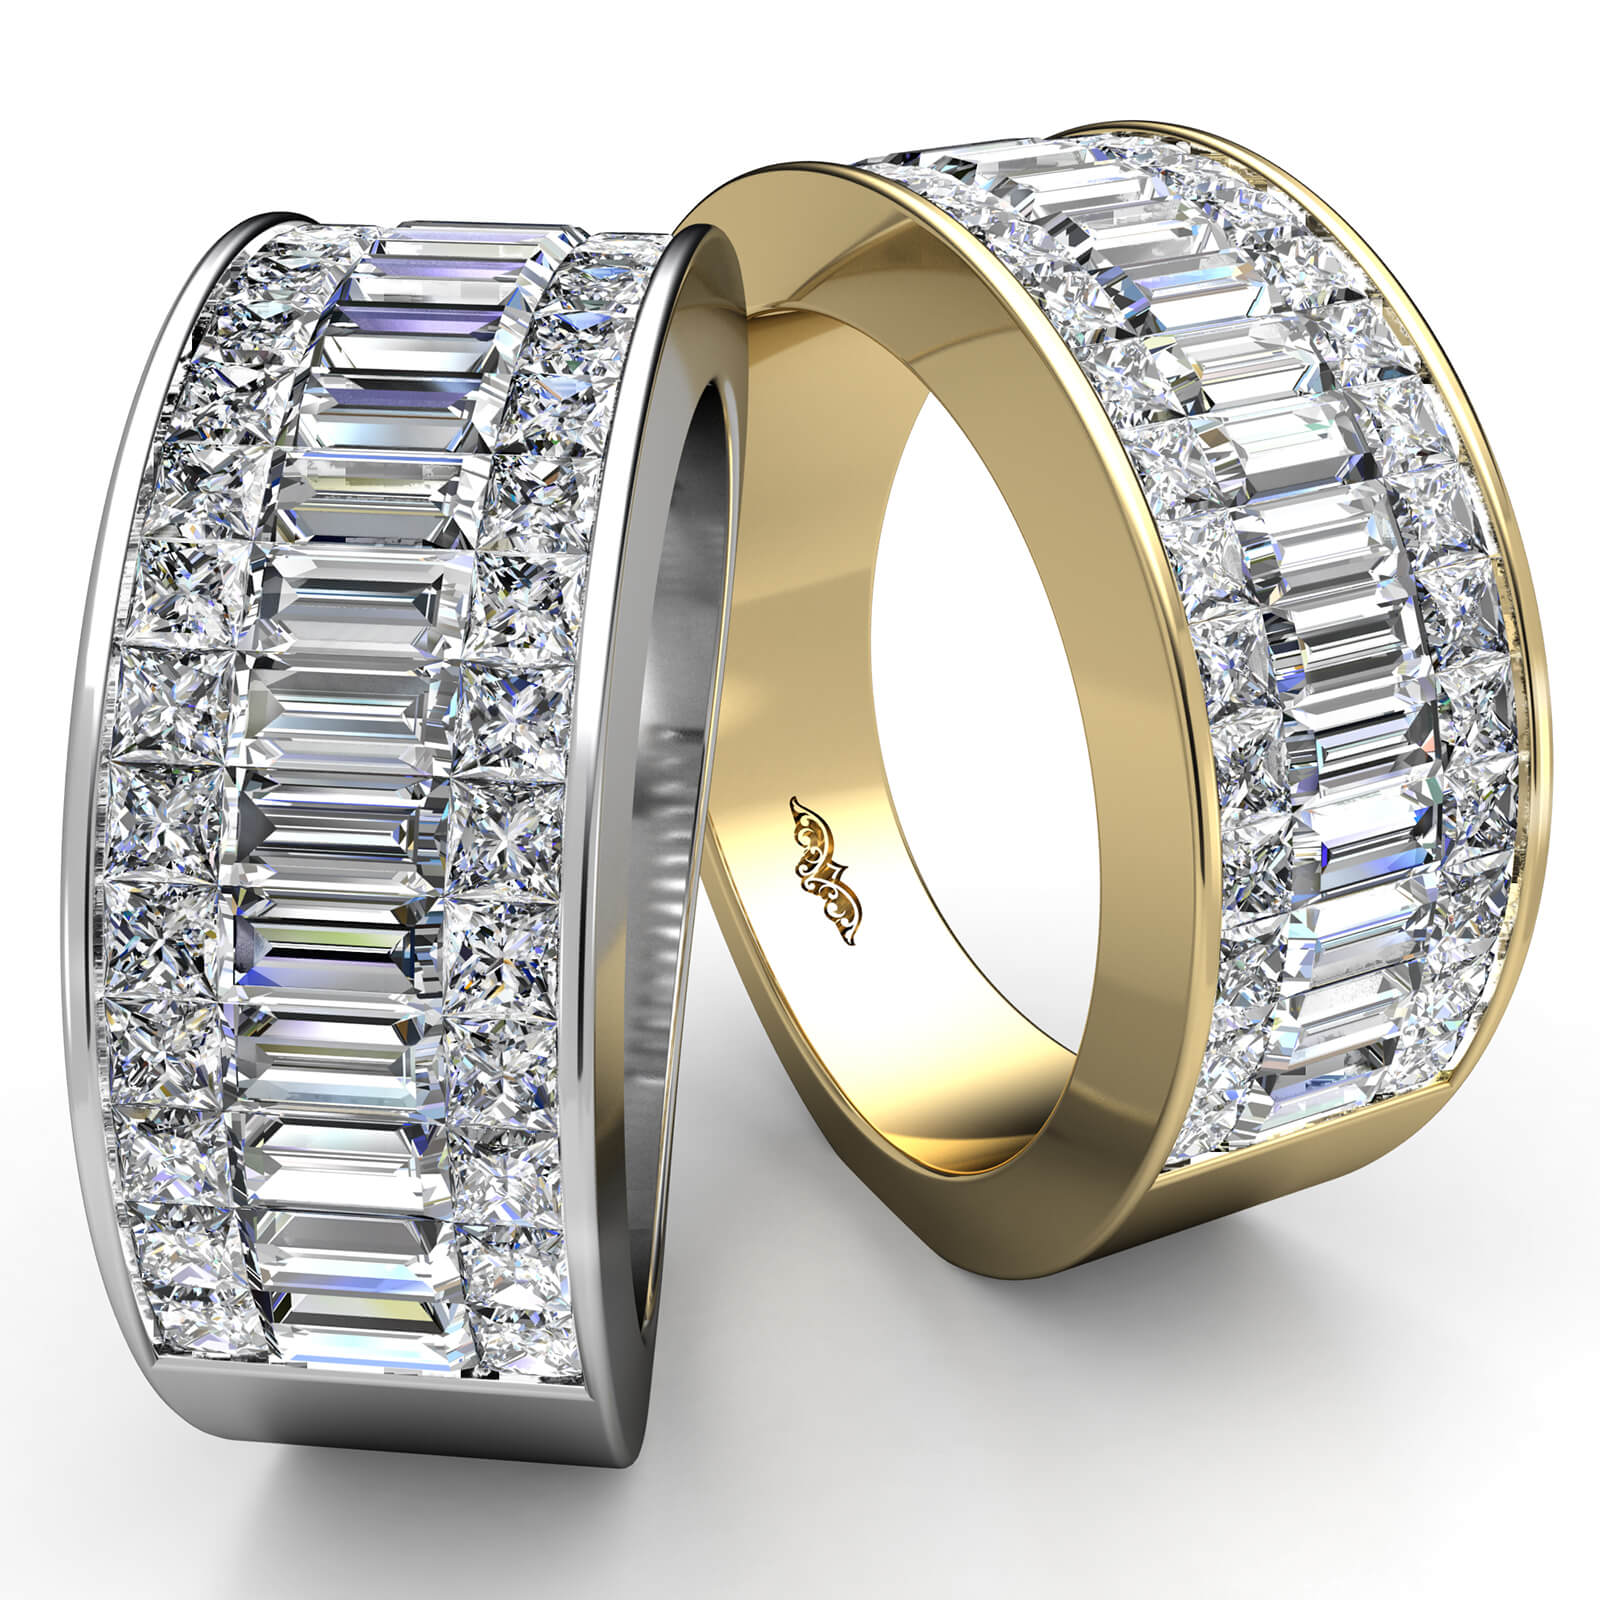 The Channel Set Baguette Eternity Band by Frank Darling